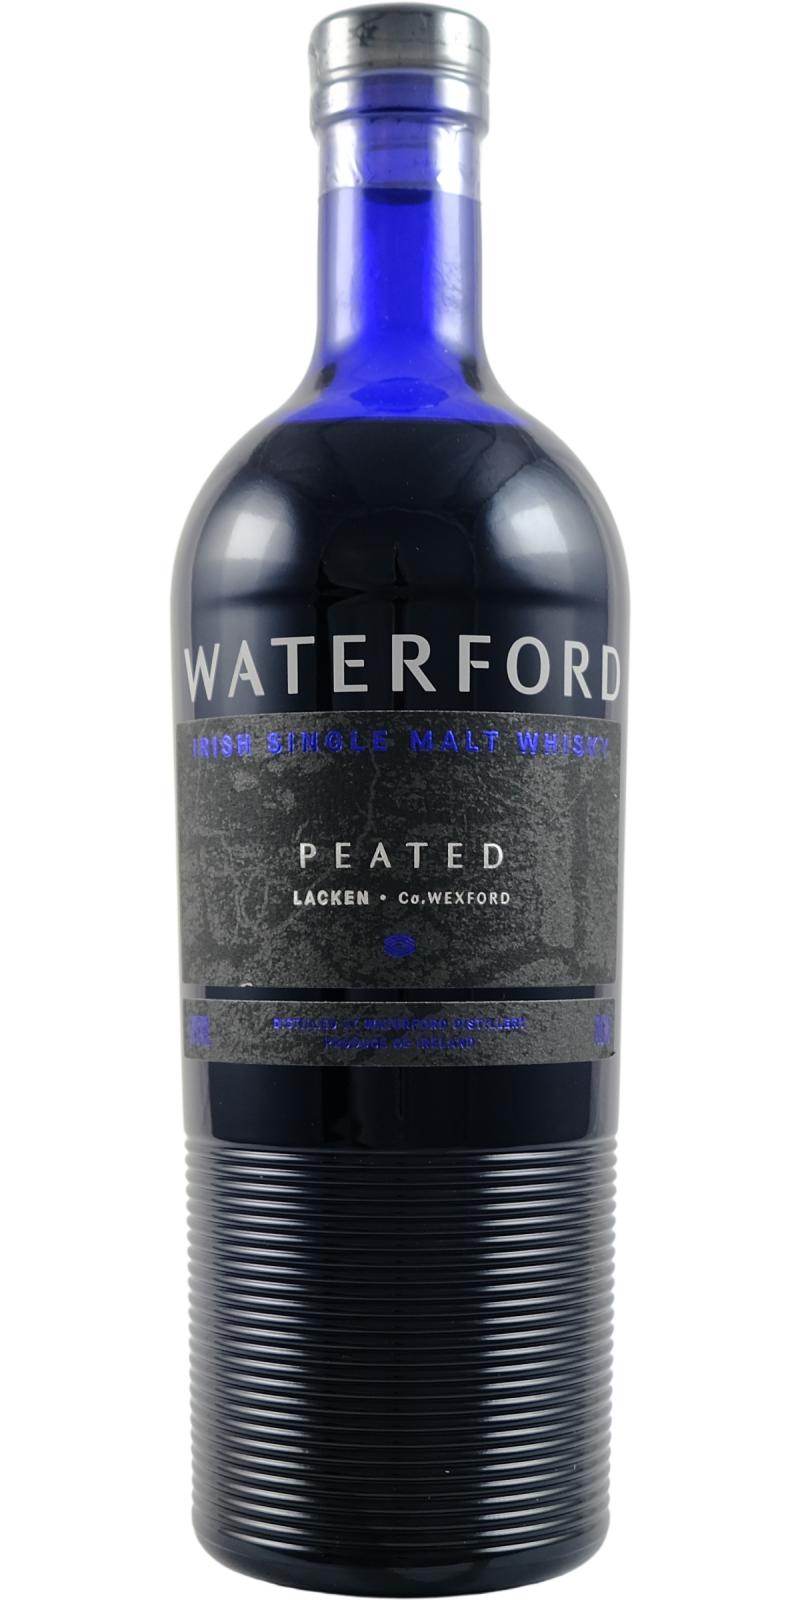 Waterford Peated Lacken